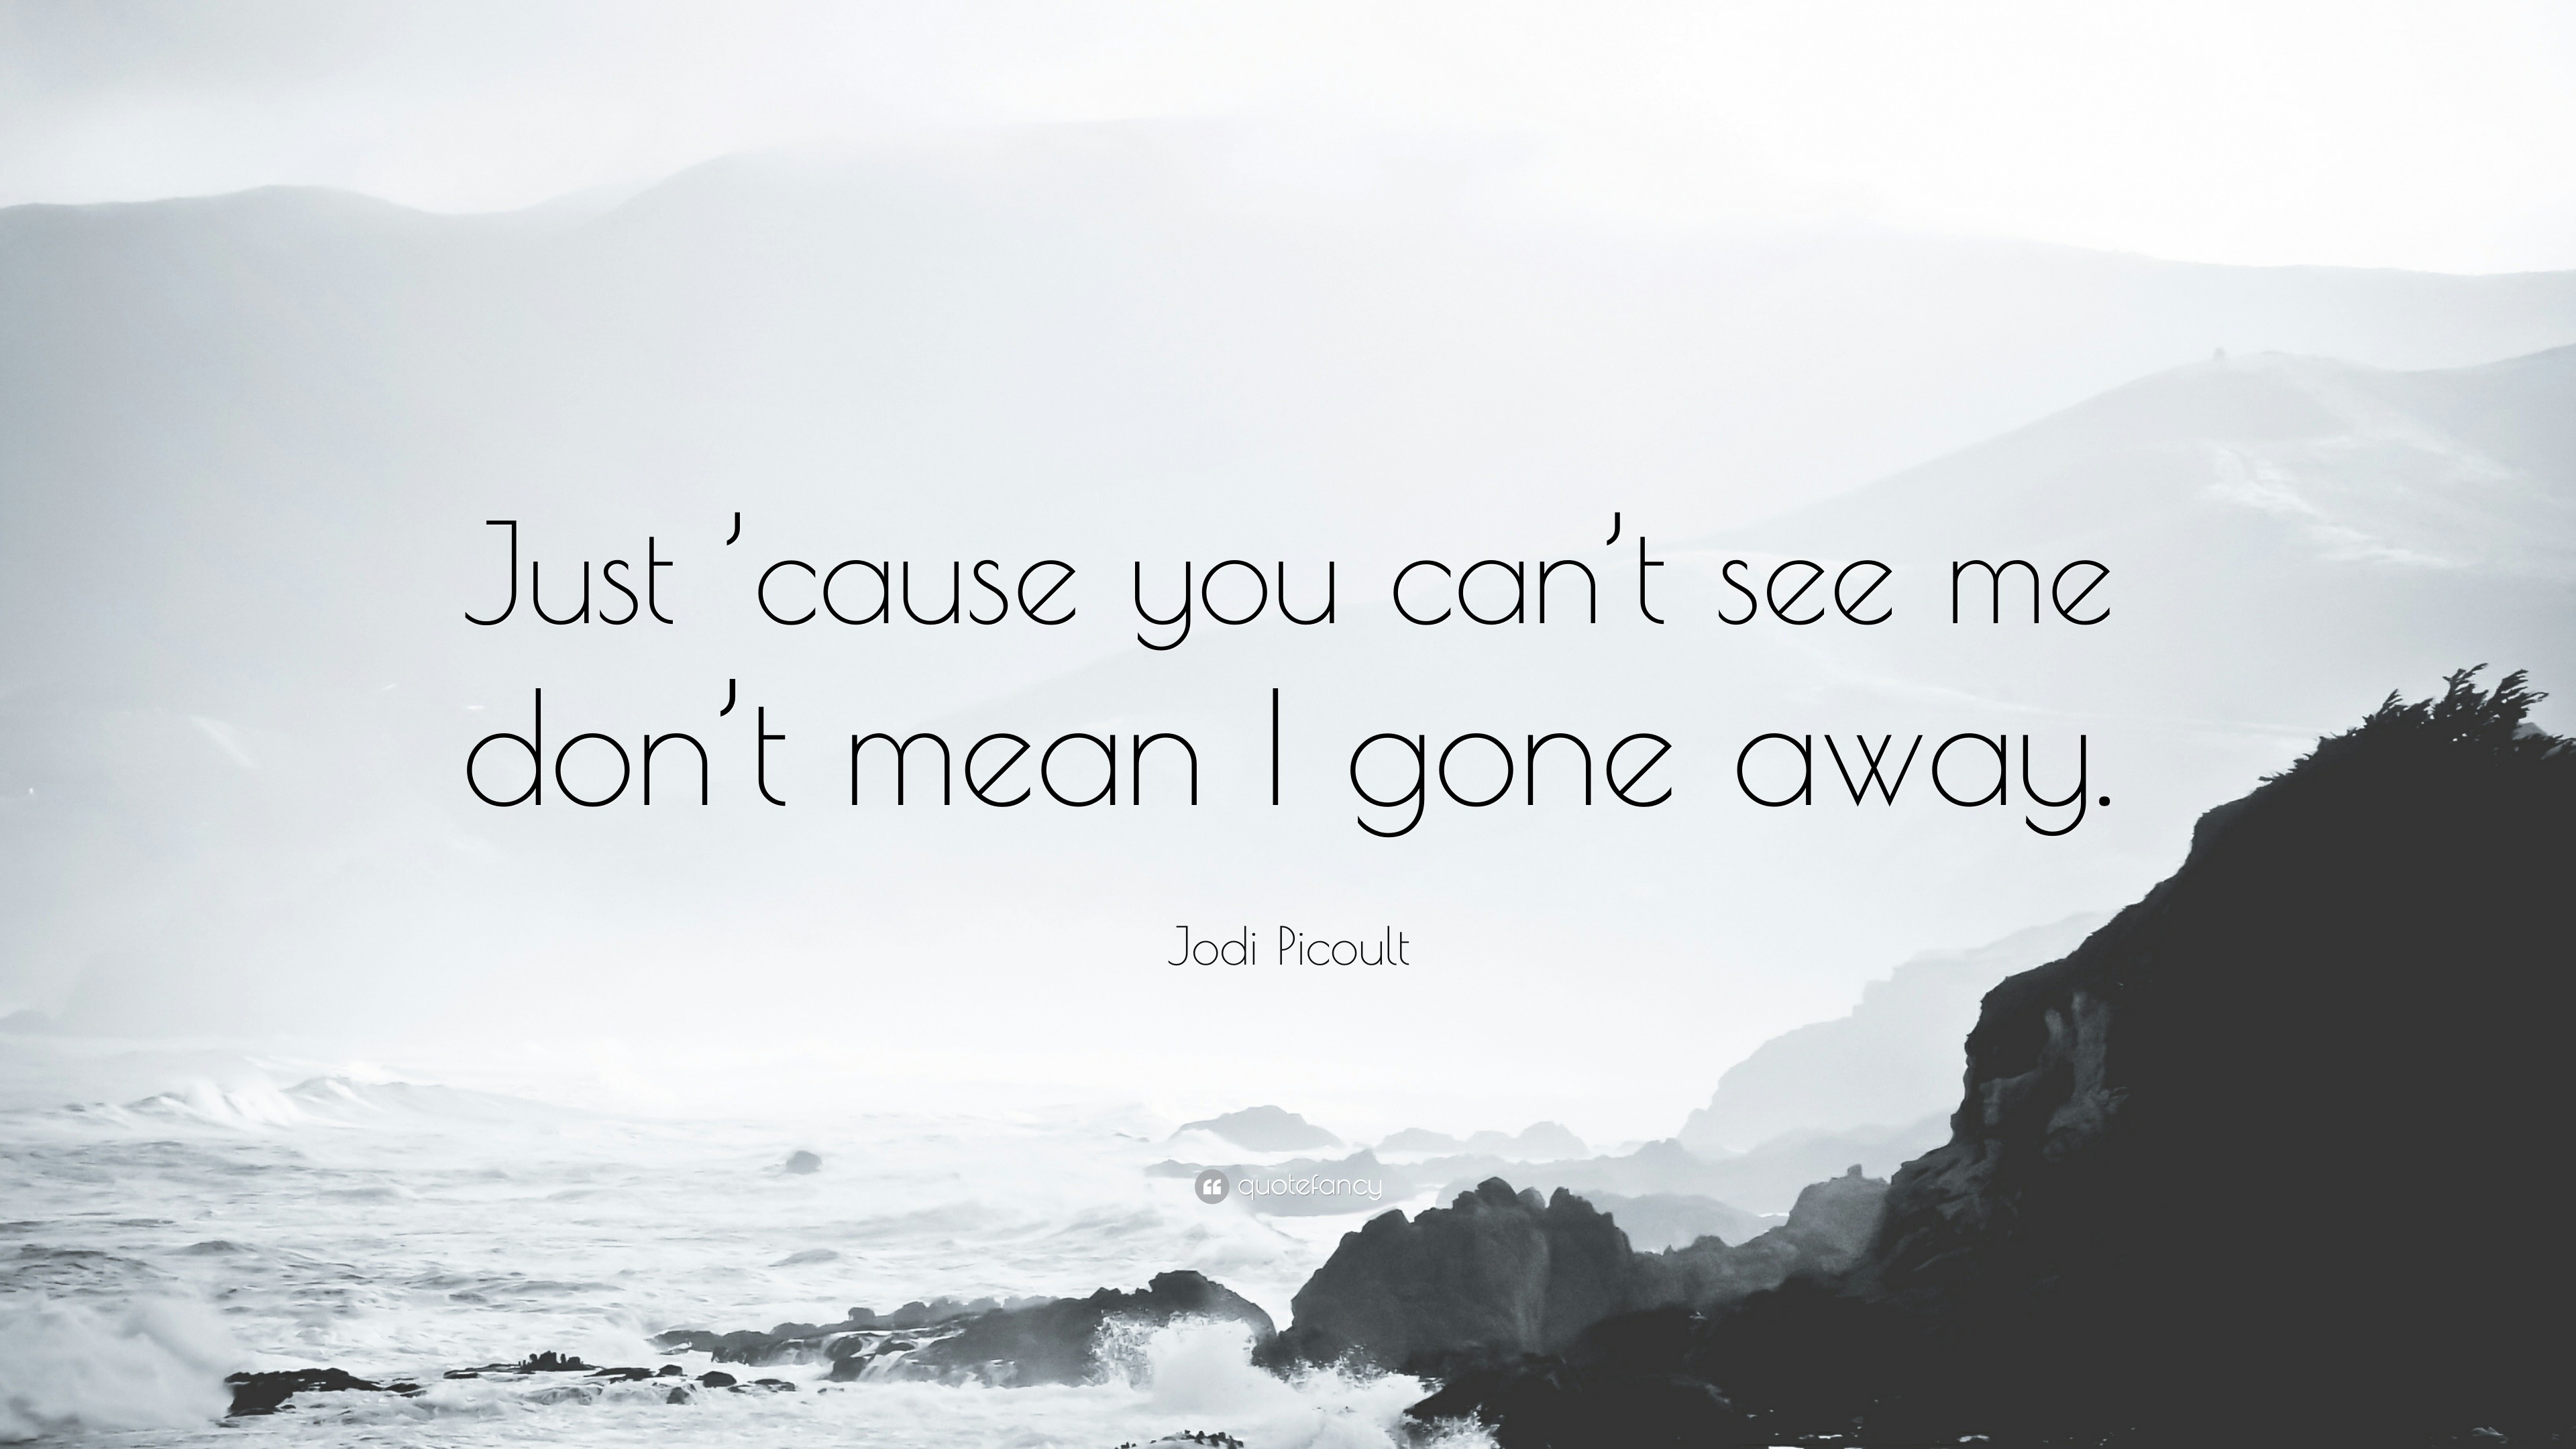 Jodi Picoult Quote Just Cause You Can T See Me Don T Mean I Gone Away 12 Wallpapers Quotefancy